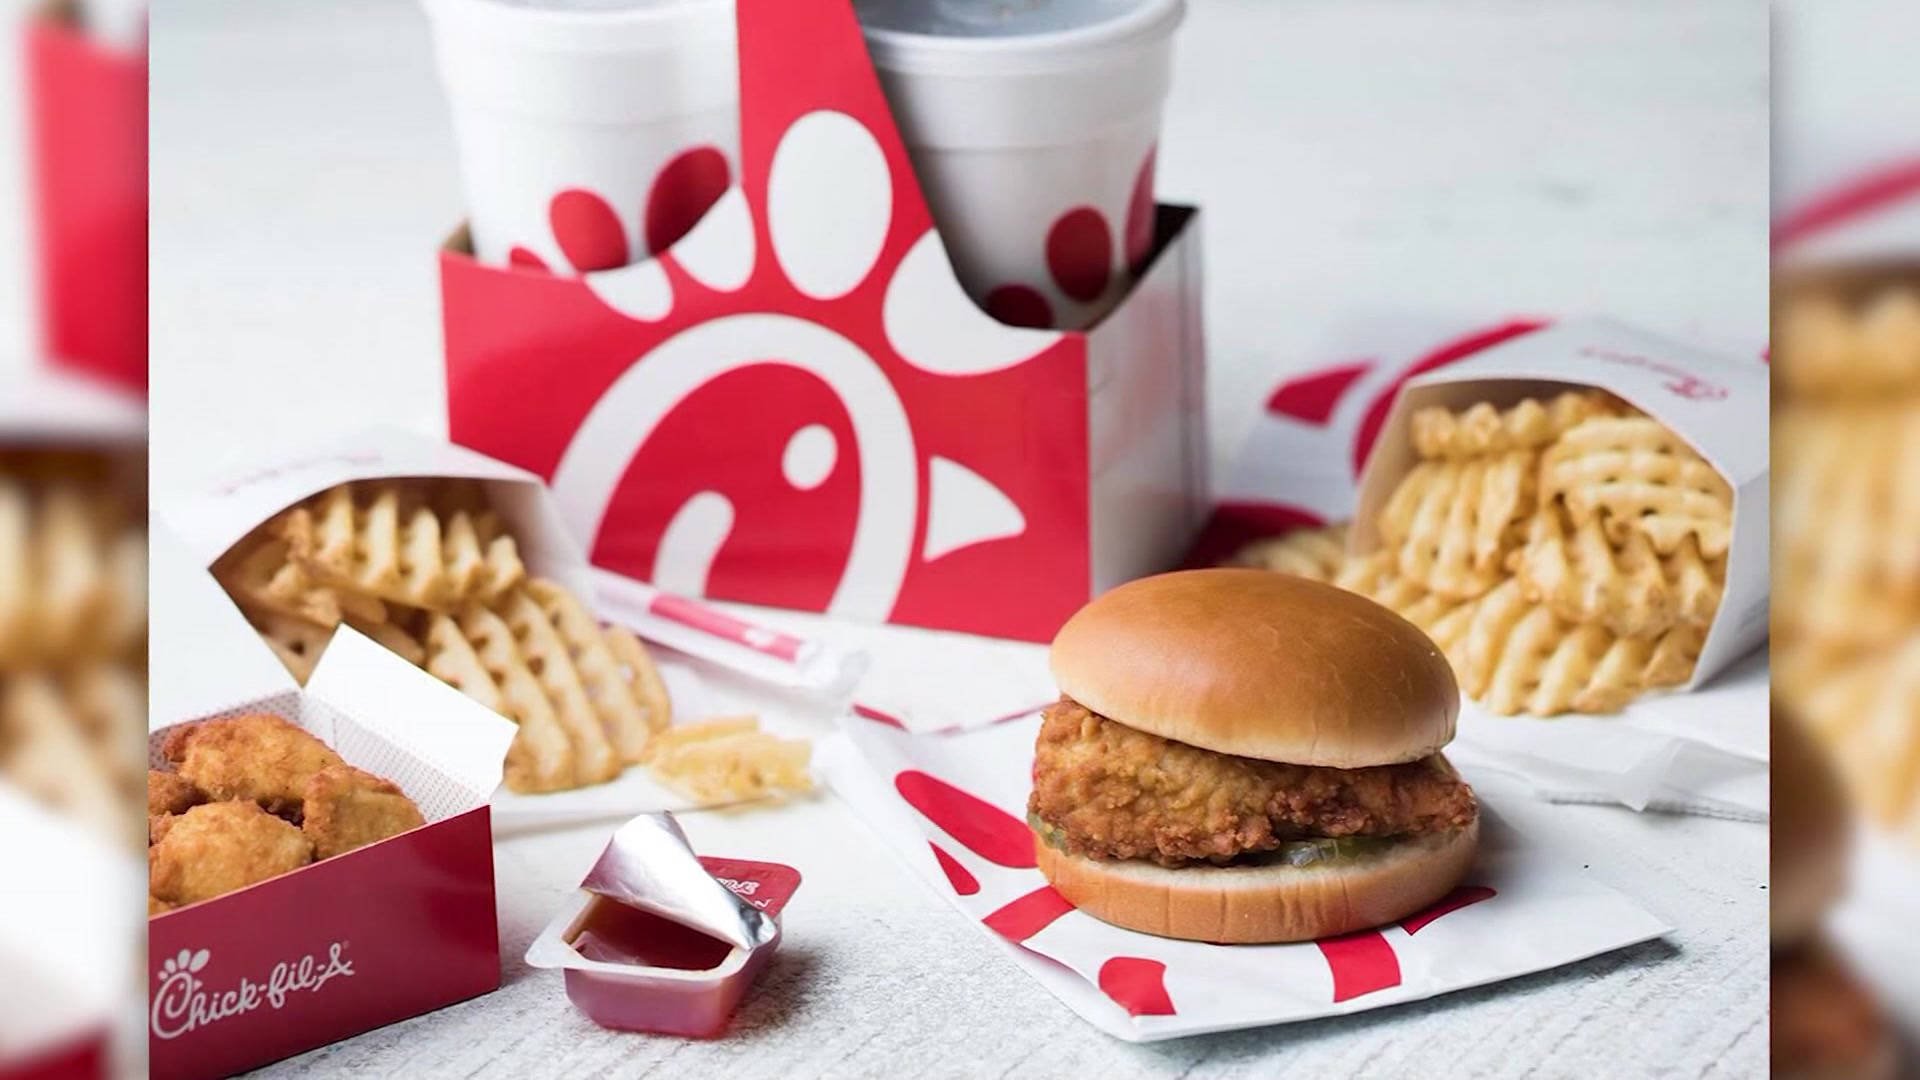 Chick Fil A Variety Meals Background